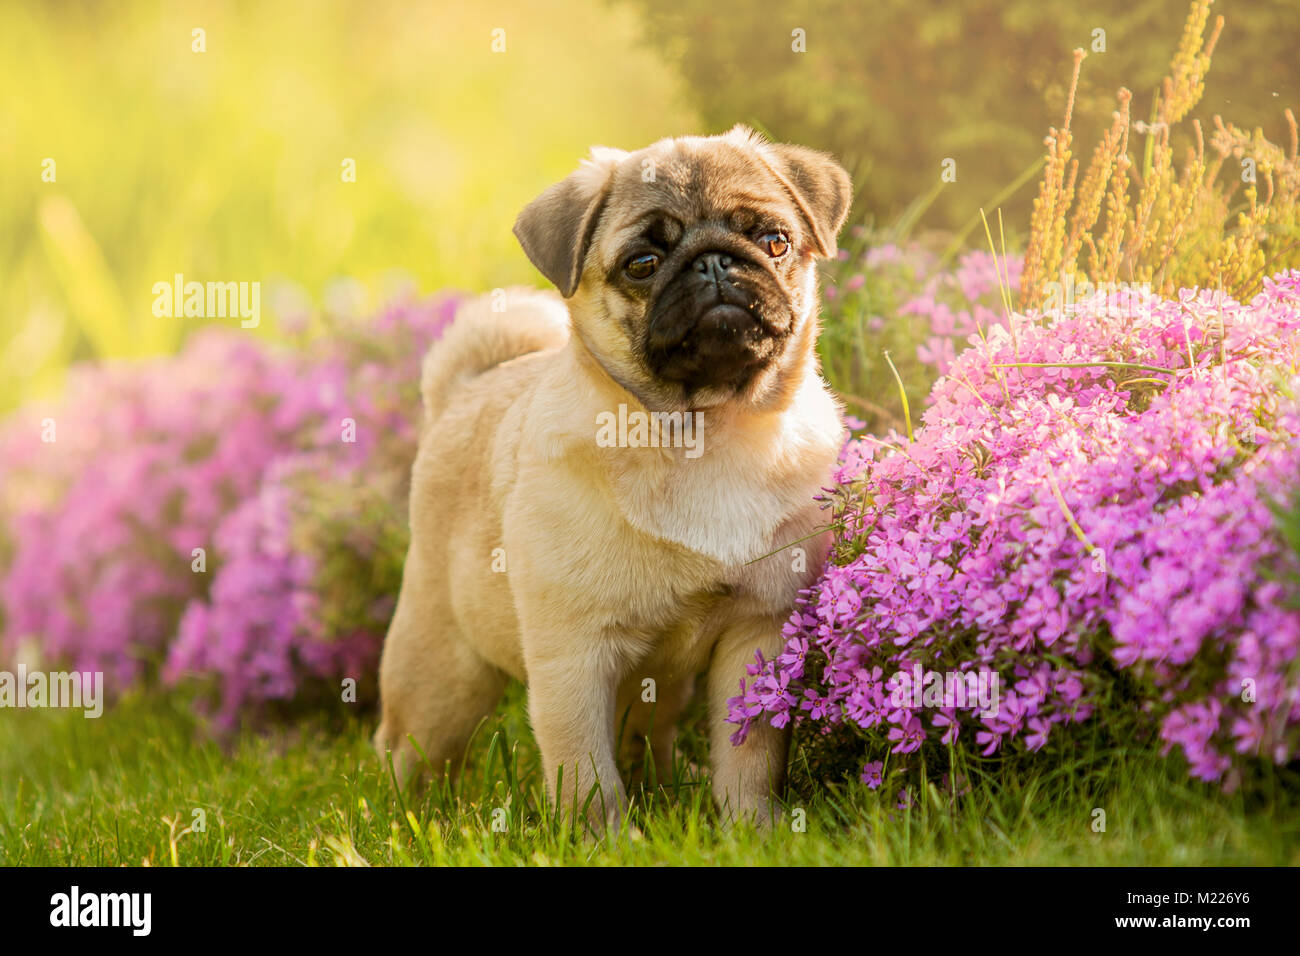 Puppy dog, the pug in the garden on the lawn, on the green grass near flowers pink Stock Photo